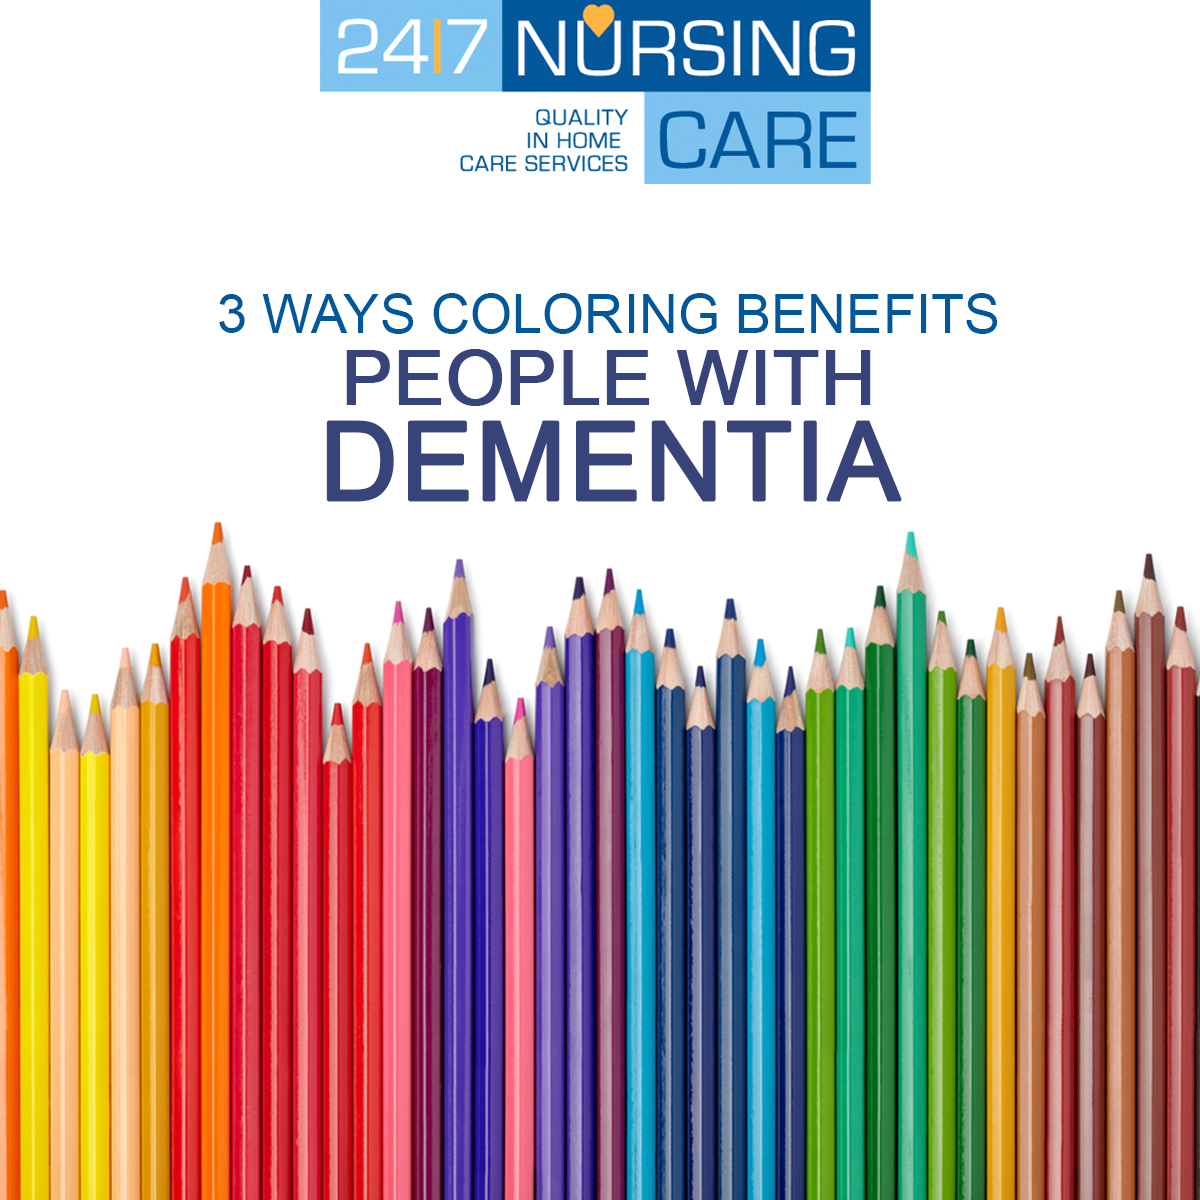 3 Ways Coloring Benefits People with Dementia - 24|7 Nursing Care